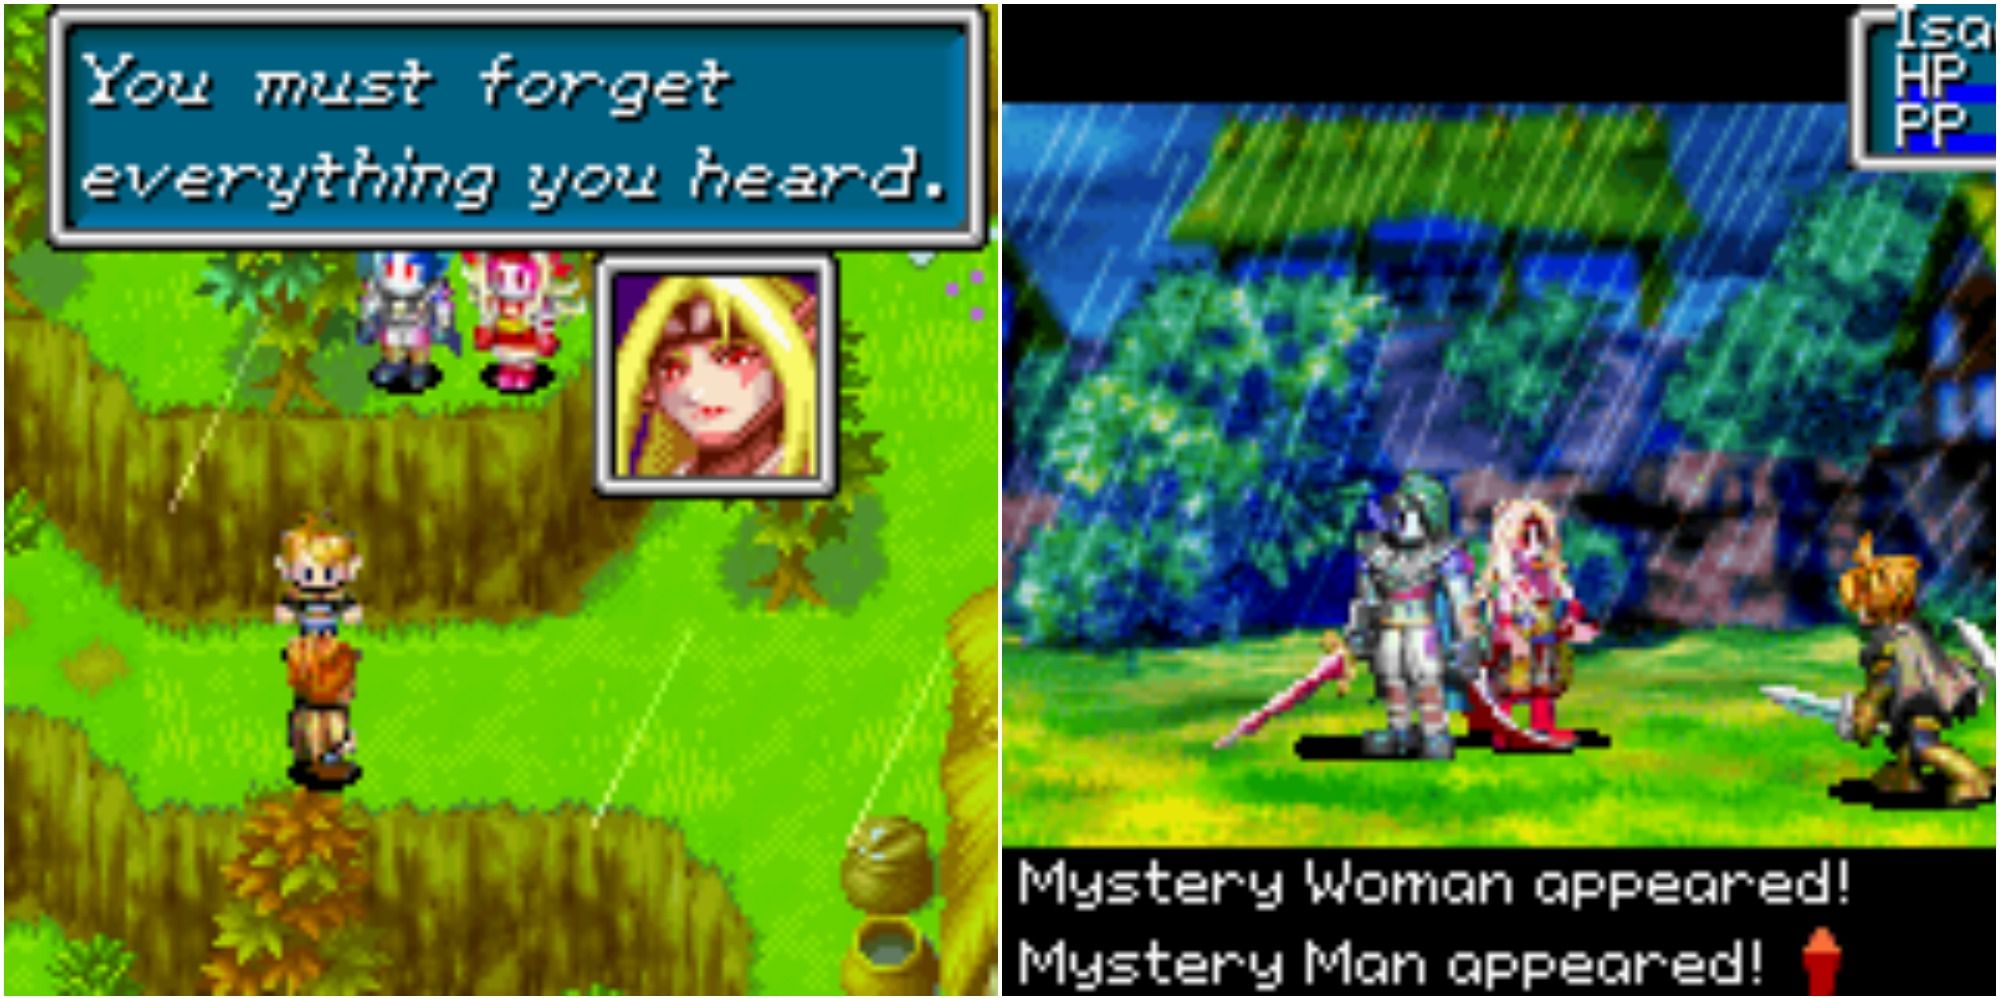 Split image of the first encounter with and the first fight with Saturos and Mendari from Golden Sun. They are labeled Mystery Man and Mystery Woman in the battle.